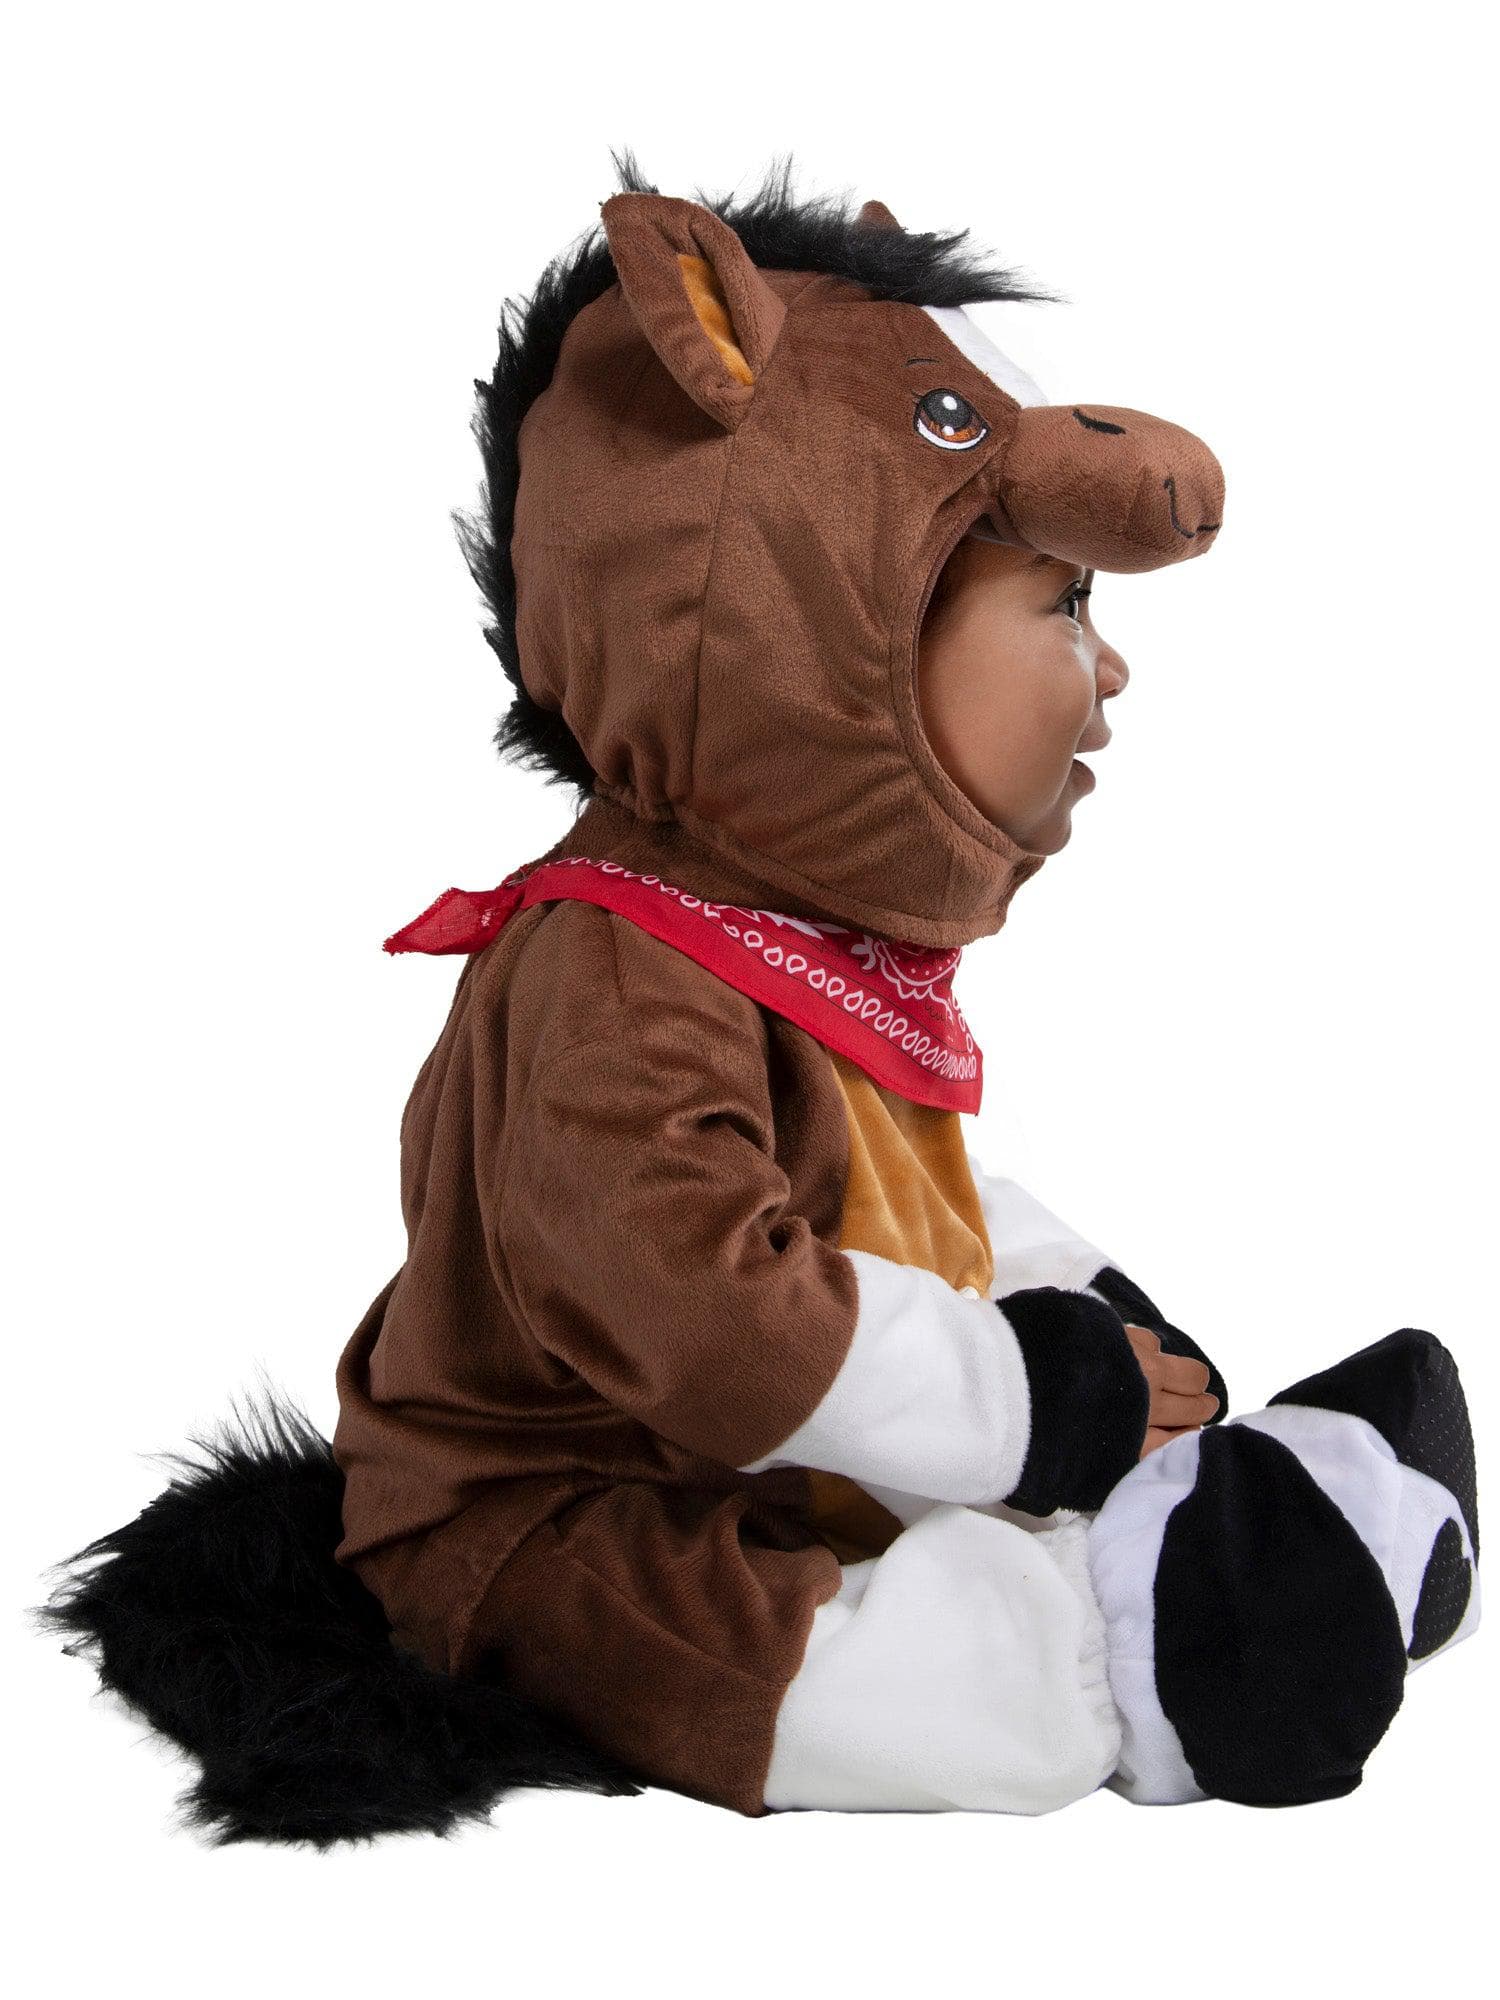 Giddy-Up Pony Baby/Toddler Costume - costumes.com